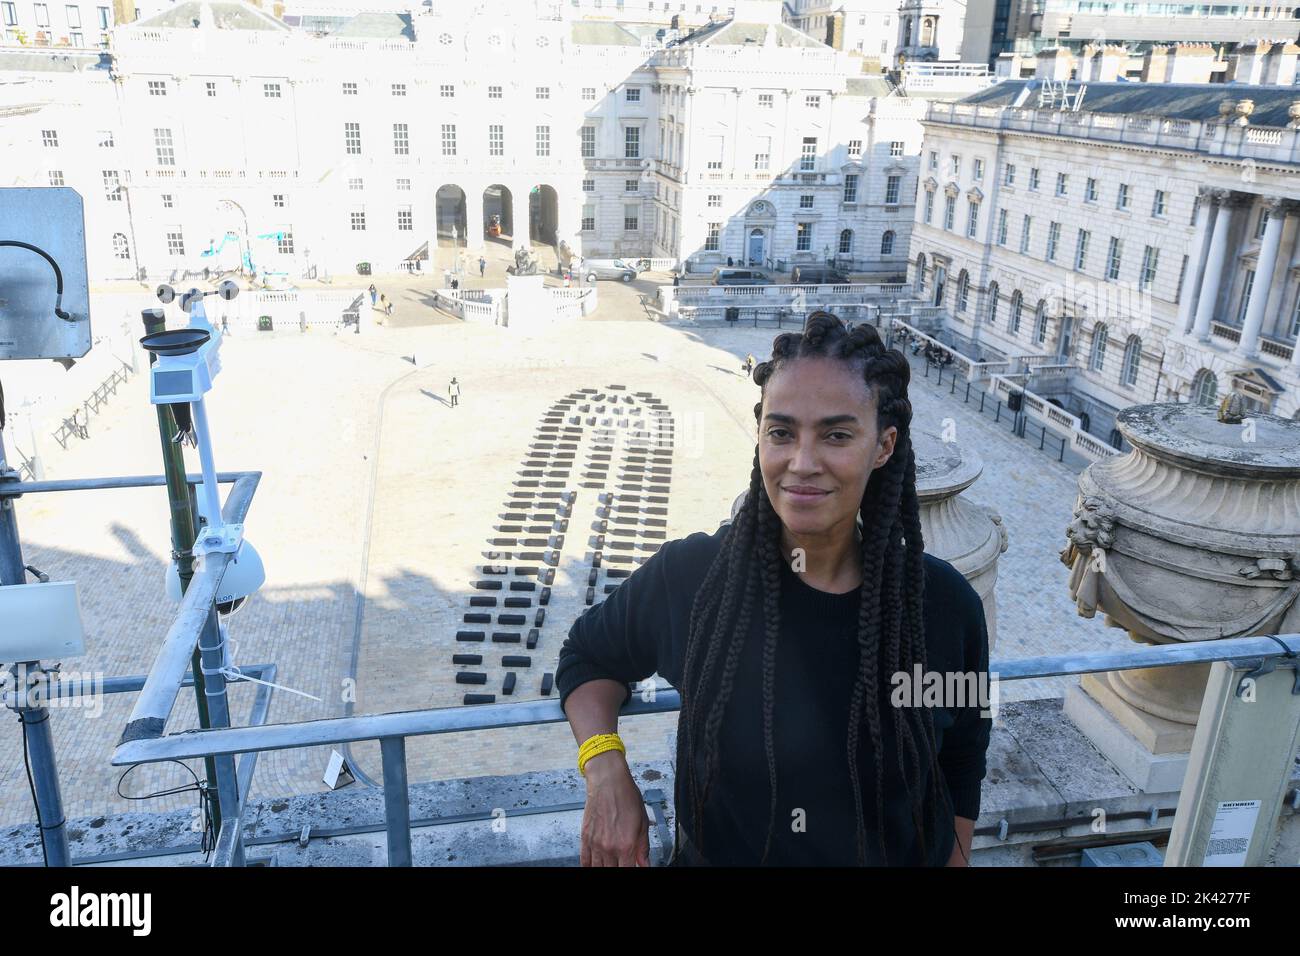 London, UK, 29/09/2022, O Barco/The Boat, large-scale installation by transdisciplinary artist Grada Kilomba, opens at Somerset House in London, to mark the 10th anniversary of 1-54 Contemporary African Art Fair. Formed of 140 wood blocks the 32-metre-long installation draws attention to the forgotten stories and identities of those who suffered during European maritime expansion and colonisation. Stock Photo